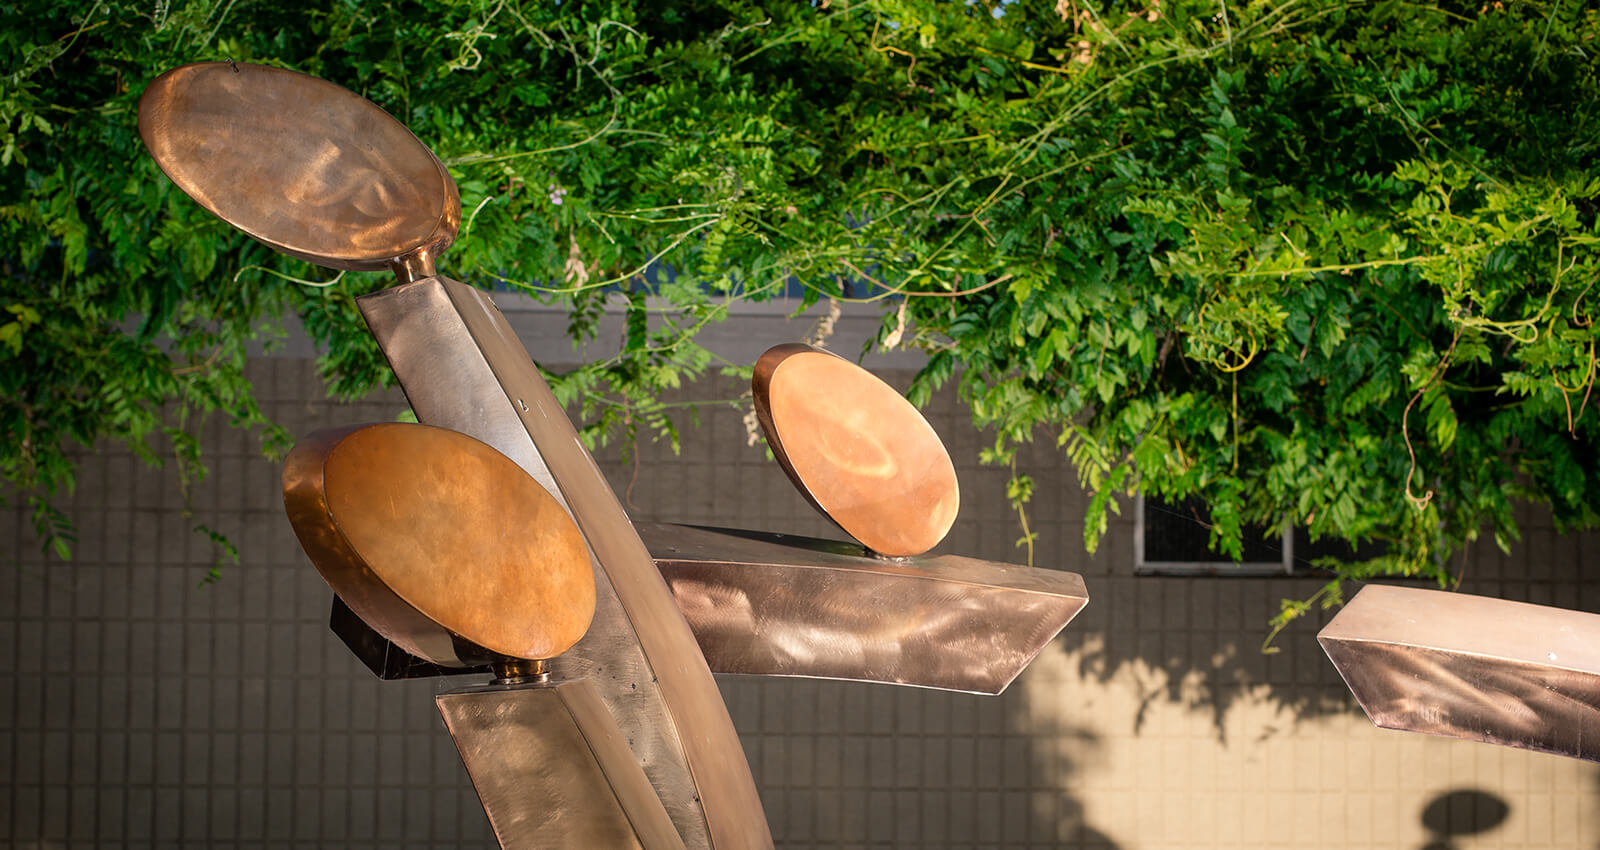 A section of the Family Group artwork's brushed steel and copper structure.